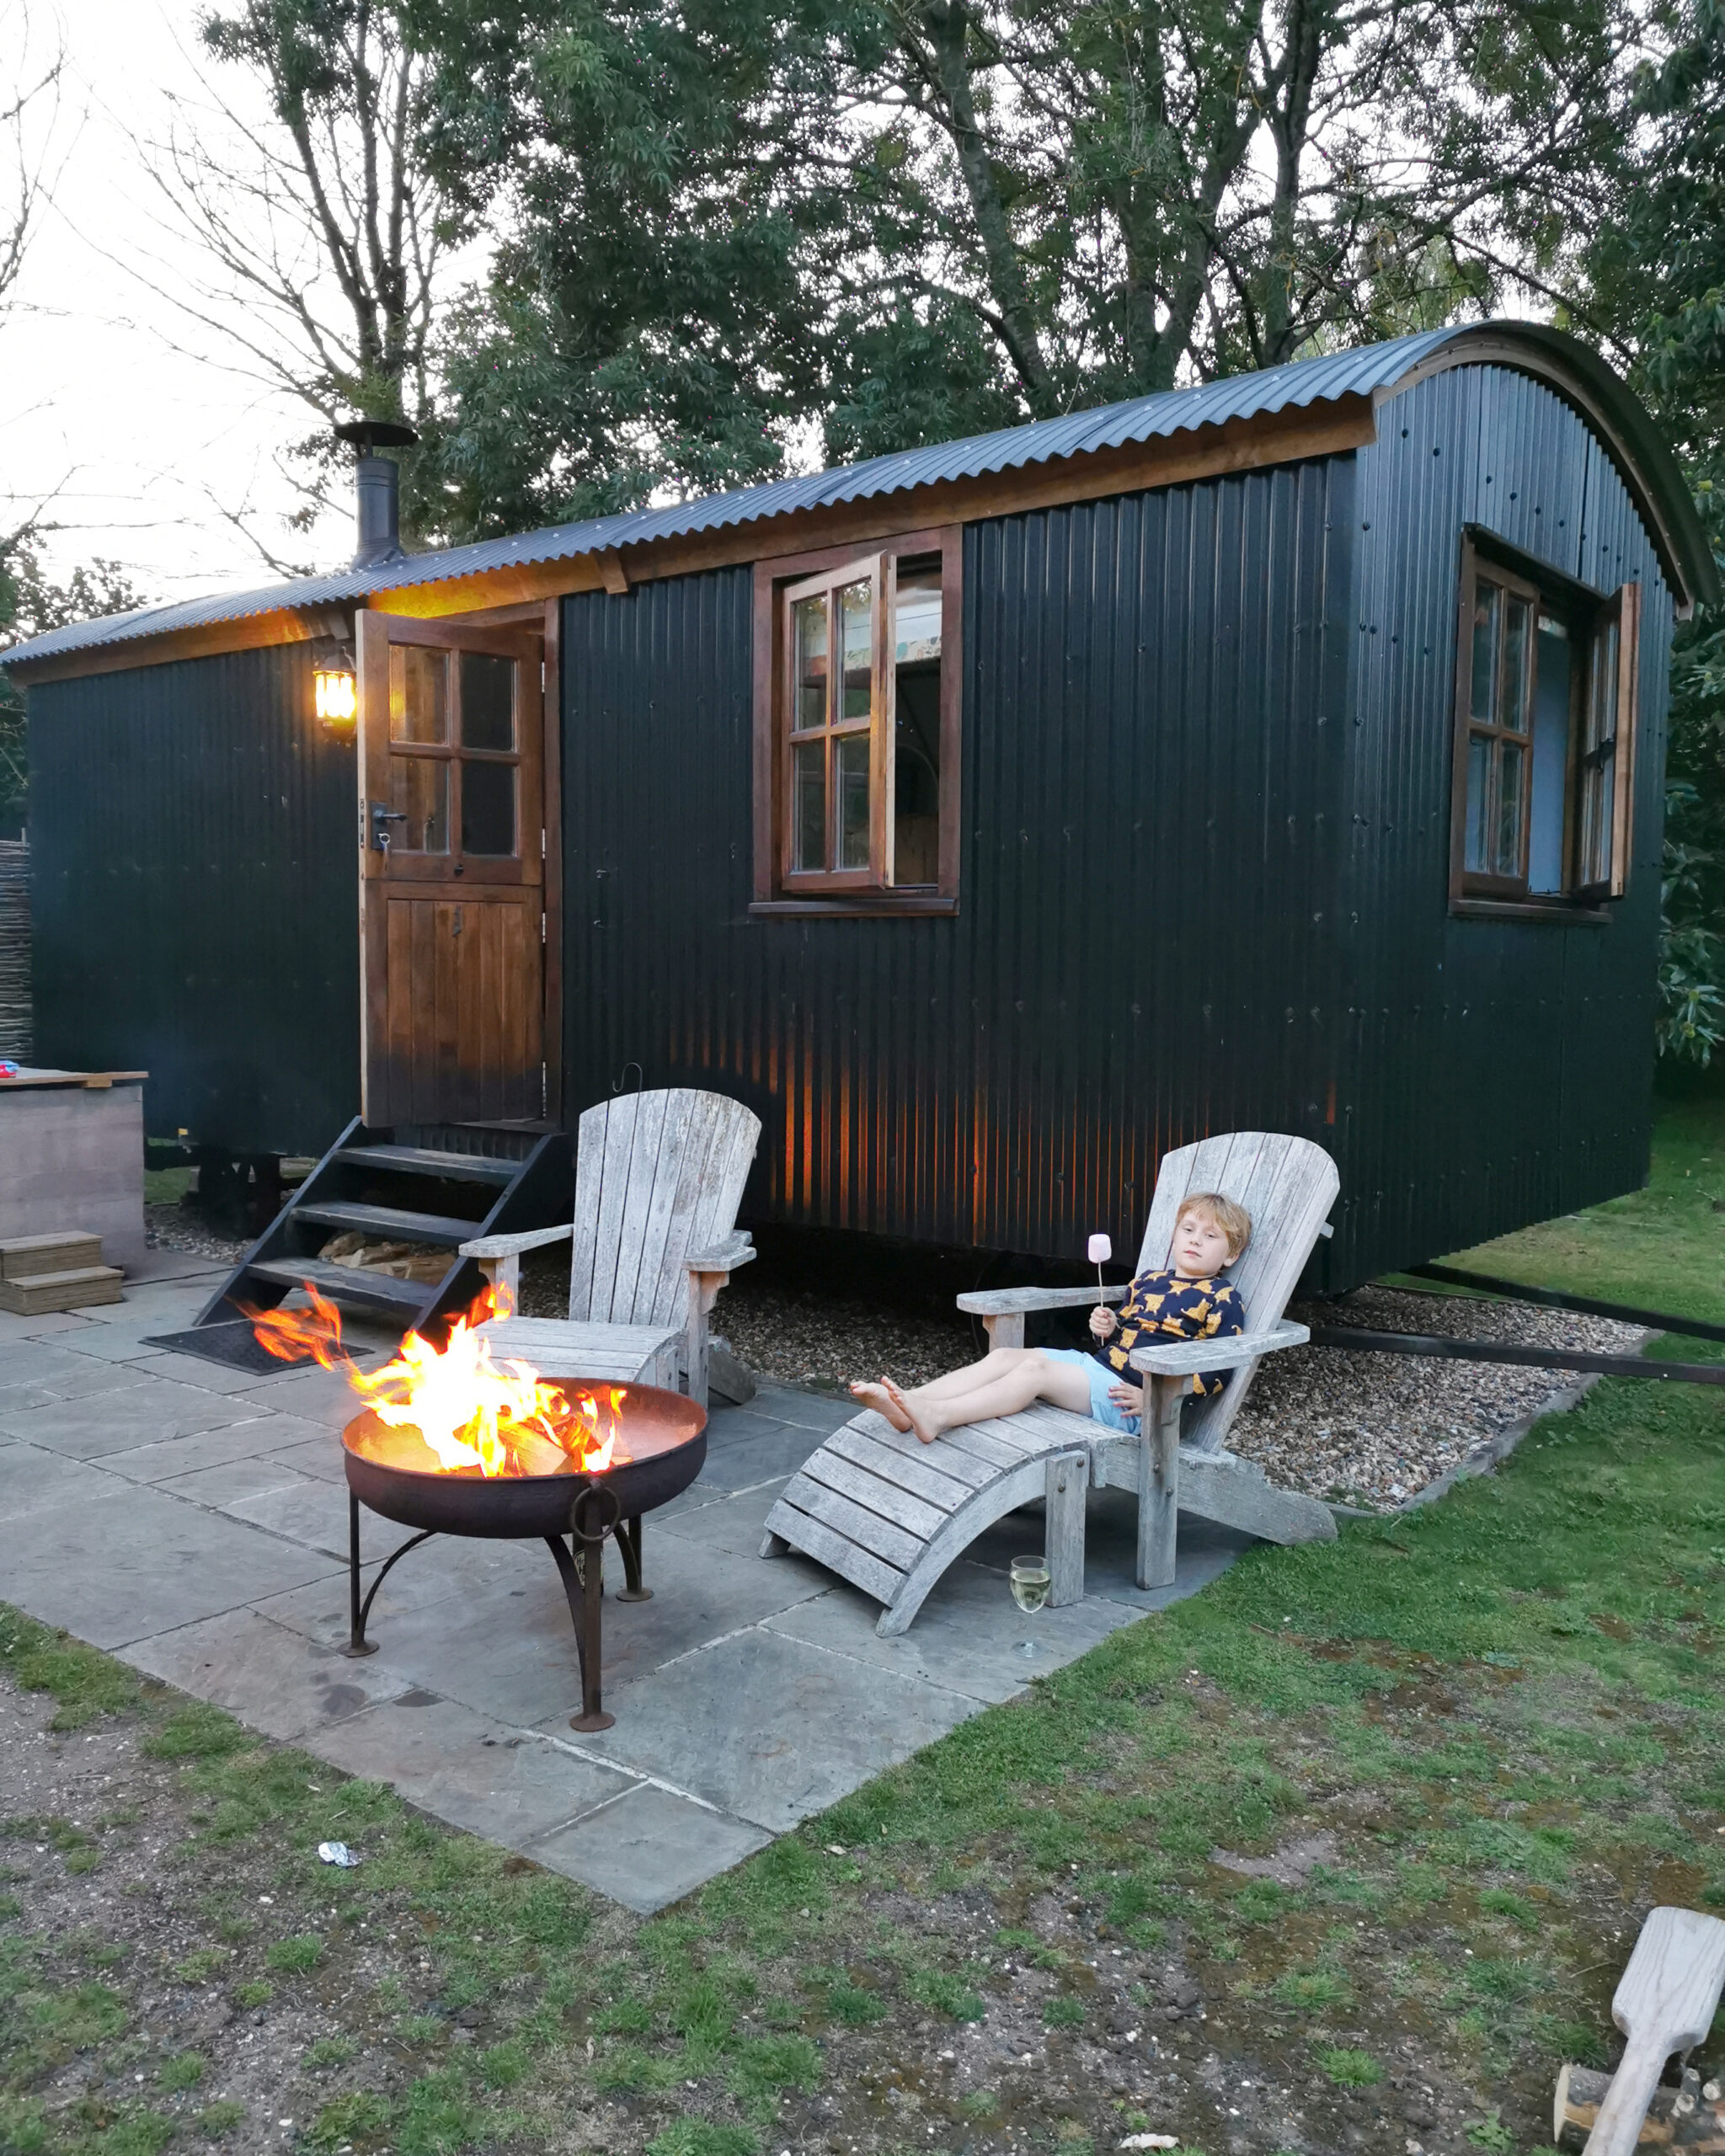 The Merry Harriers, Shepherd's Hut, Glamping, Surrey Staycation, Luxury Glamping, Family Staycation, Surrey, Godalming, The Frenchie Mummy, Press Trip, Family-Friendly, Staycation, Llama Trek, Llamas, Hot Tub, Country Adventures, 